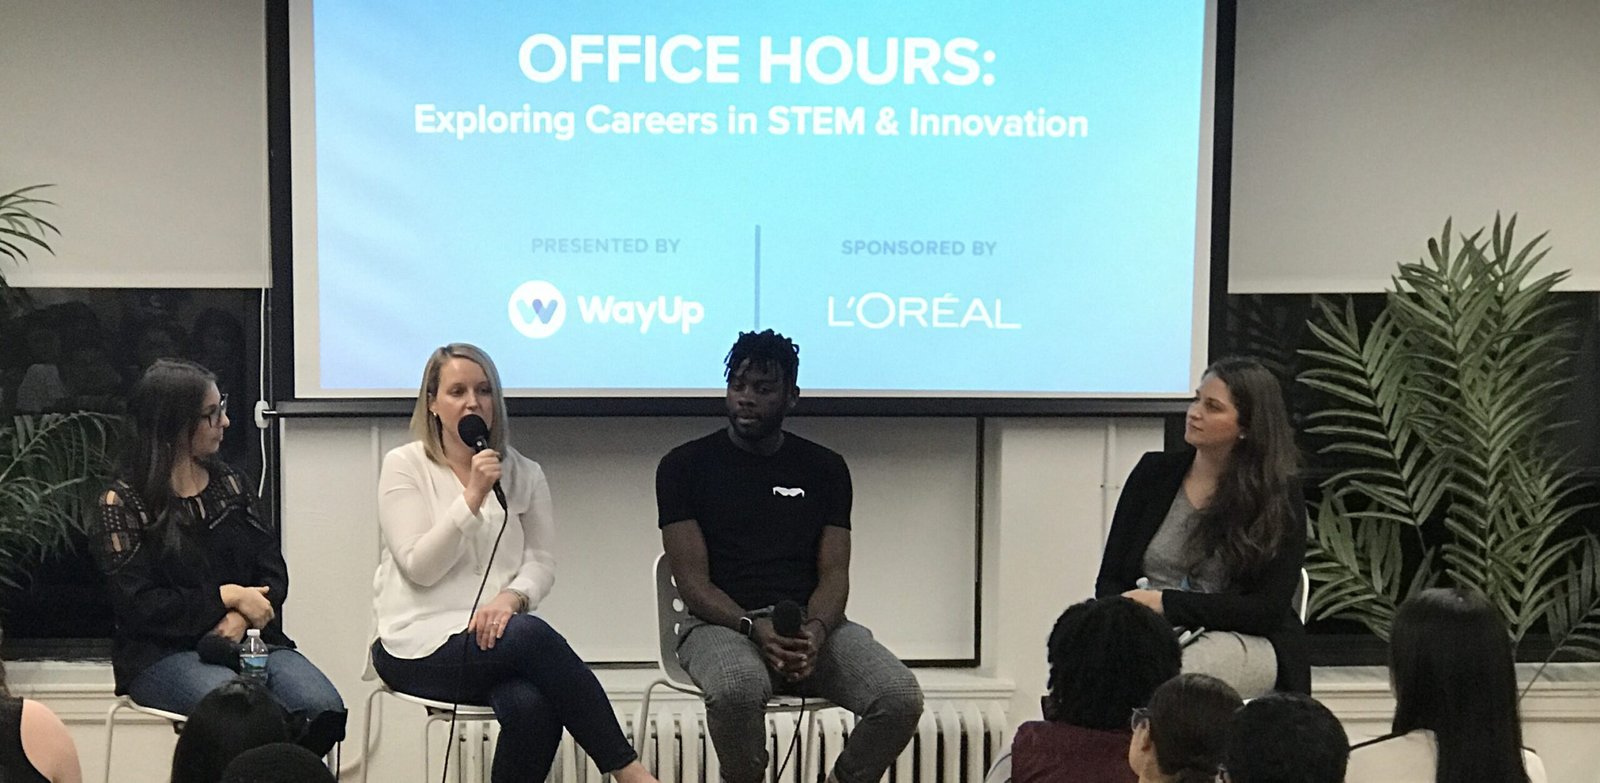 Exploring Careers in STEM and Innovation #Exploring #Careers #STEM #Innovation